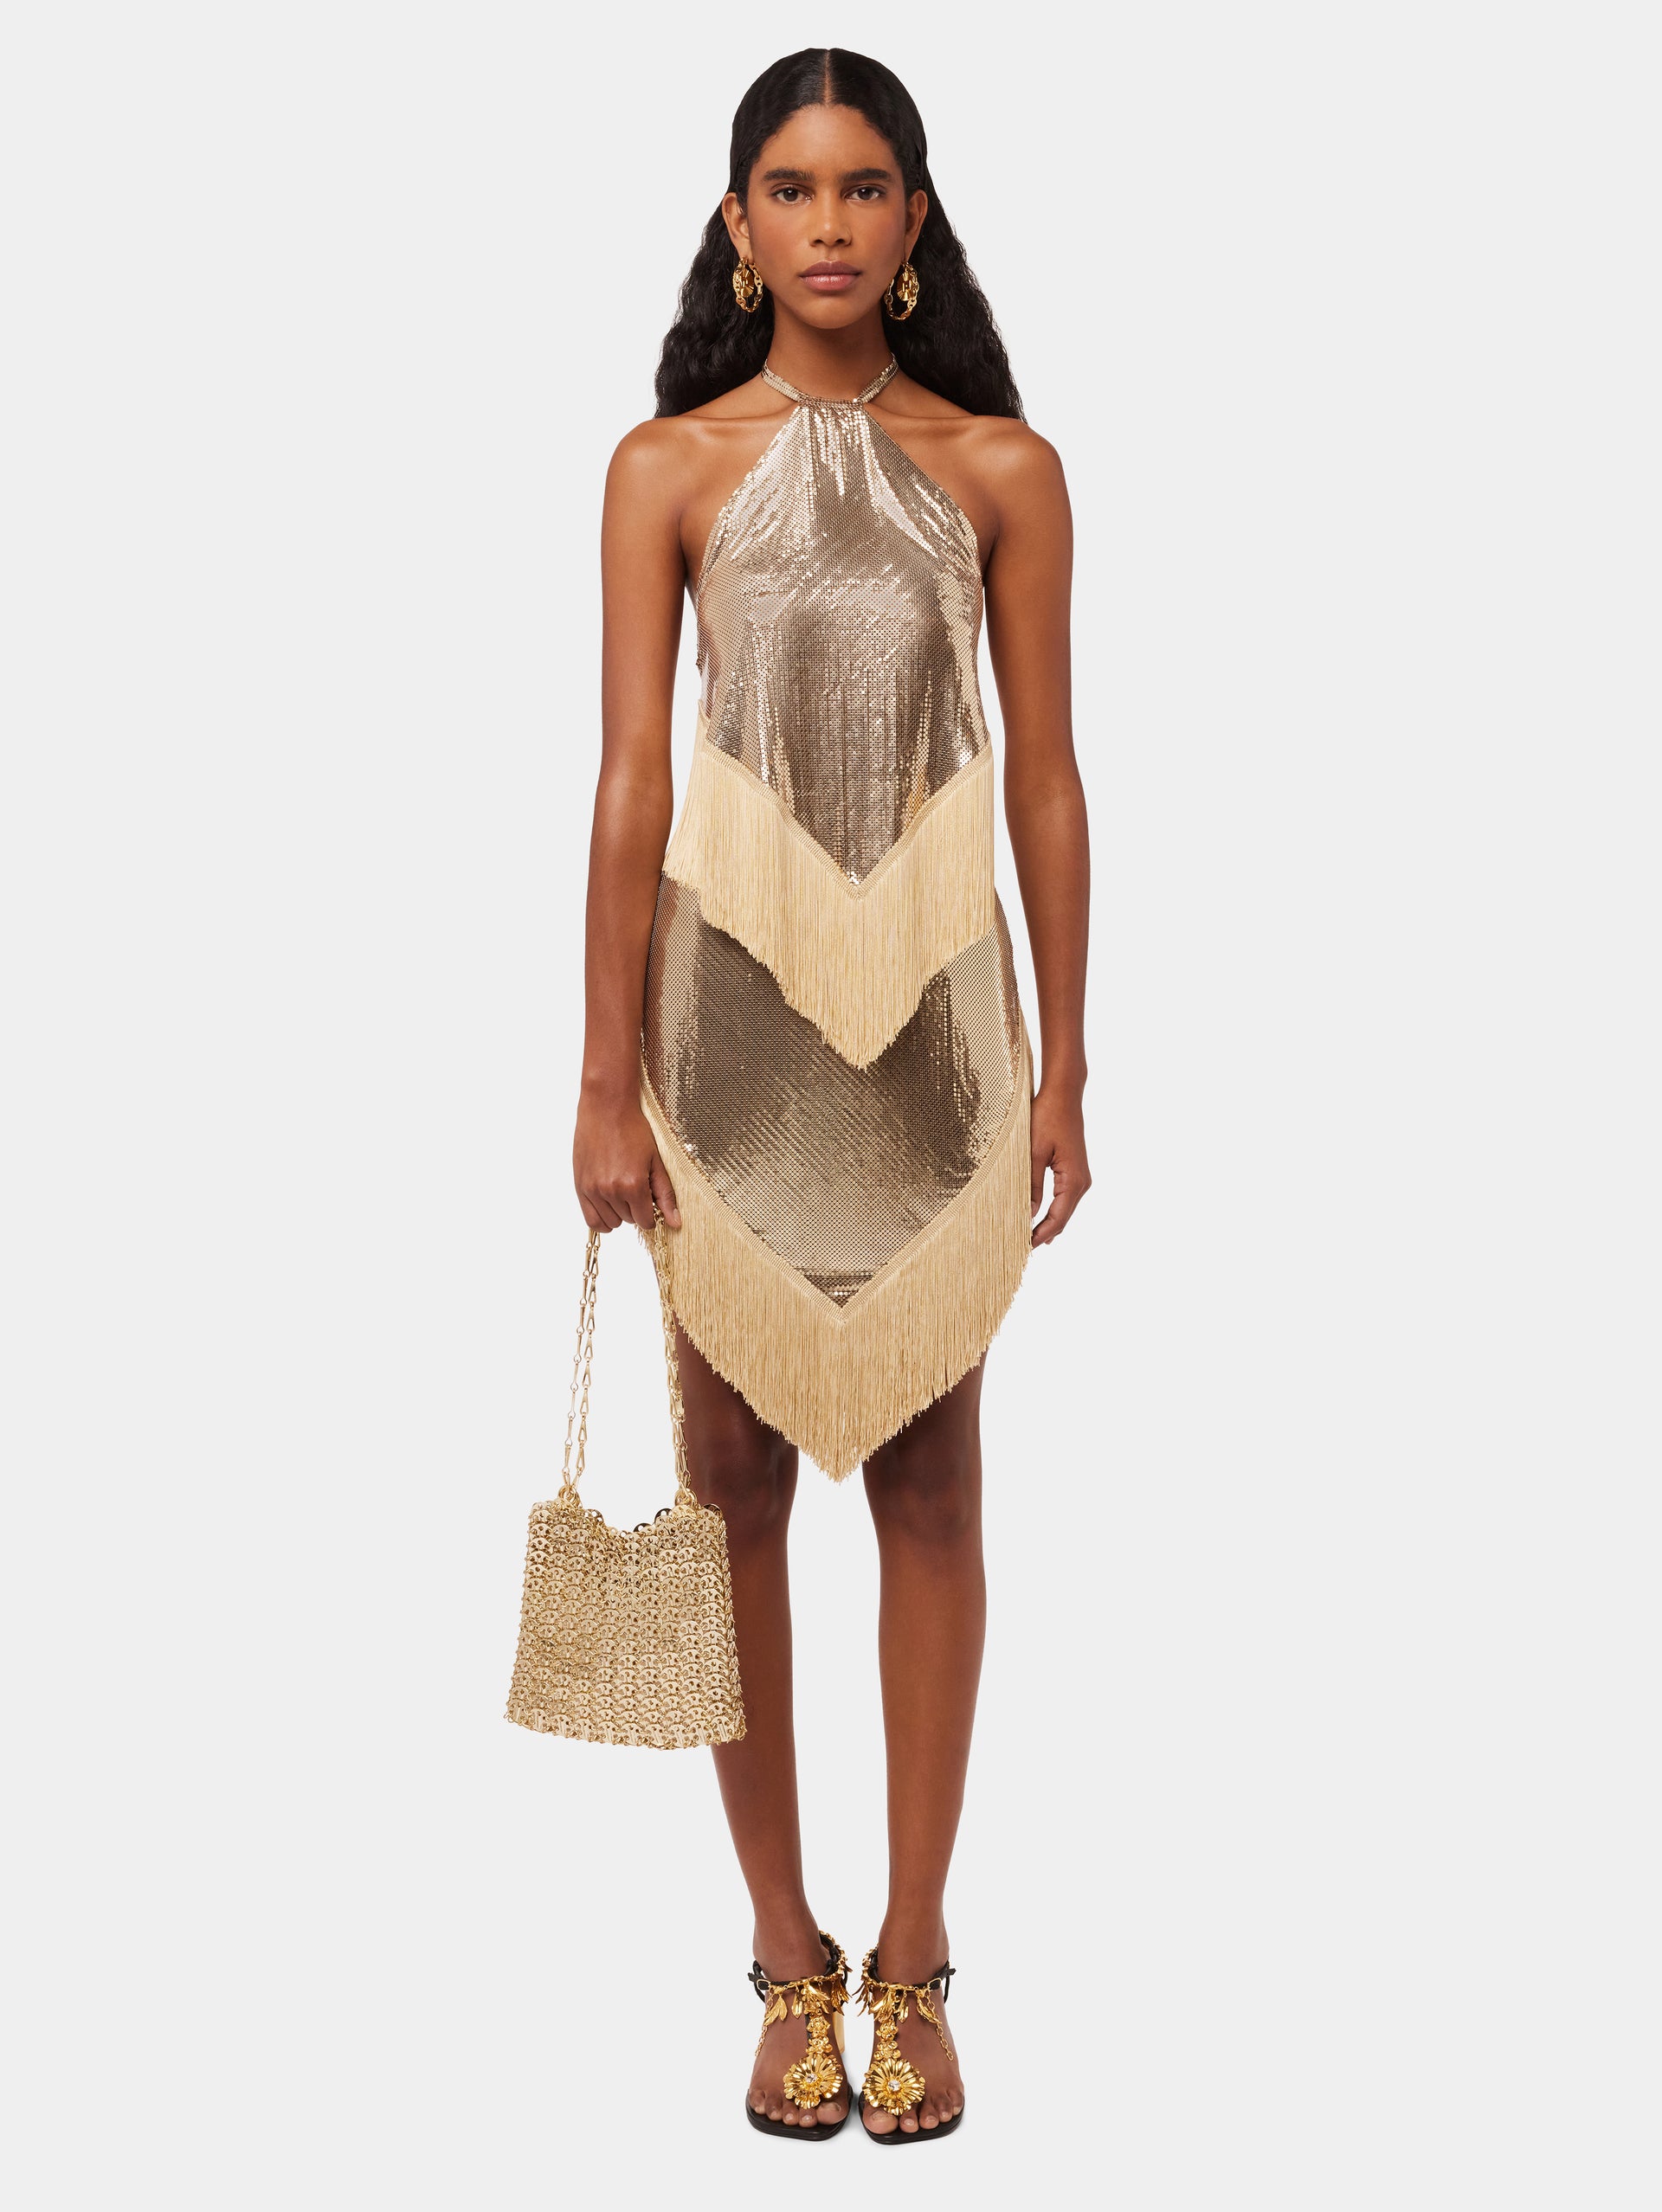 MESH SKIRT PAREO WITH FRINGES DETAILS